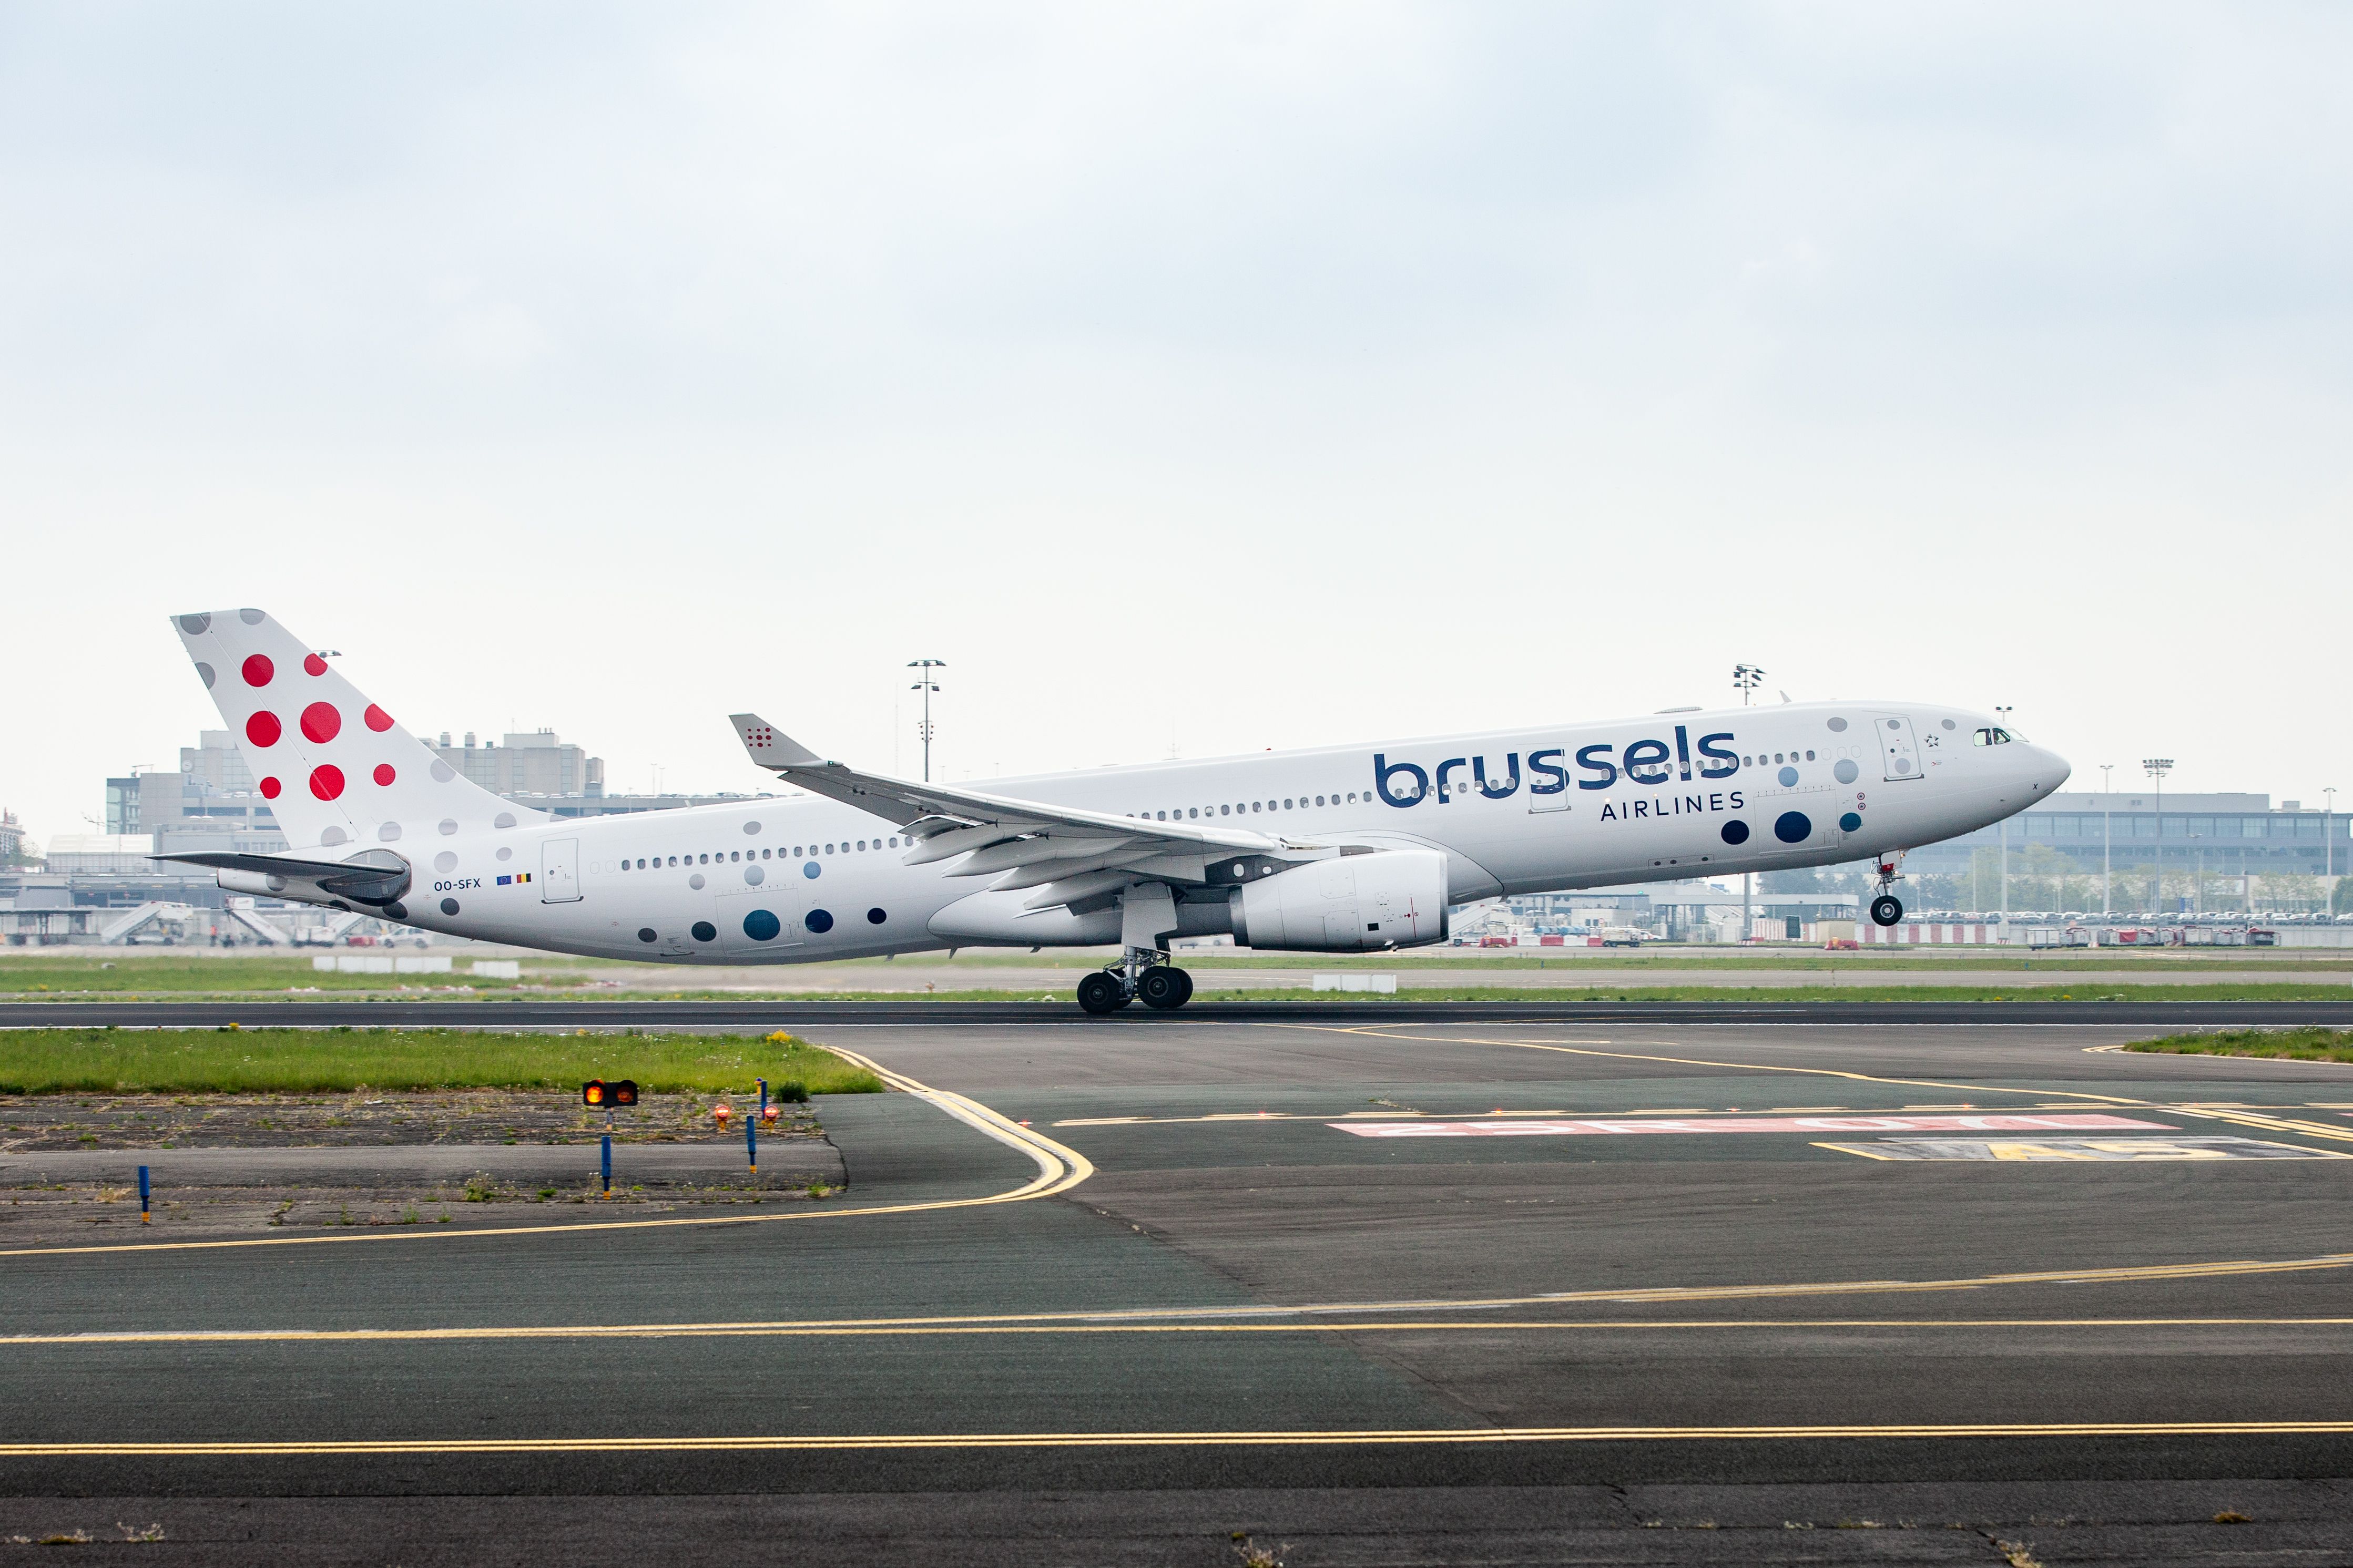 Brussels Airlines Airbus A330-300.